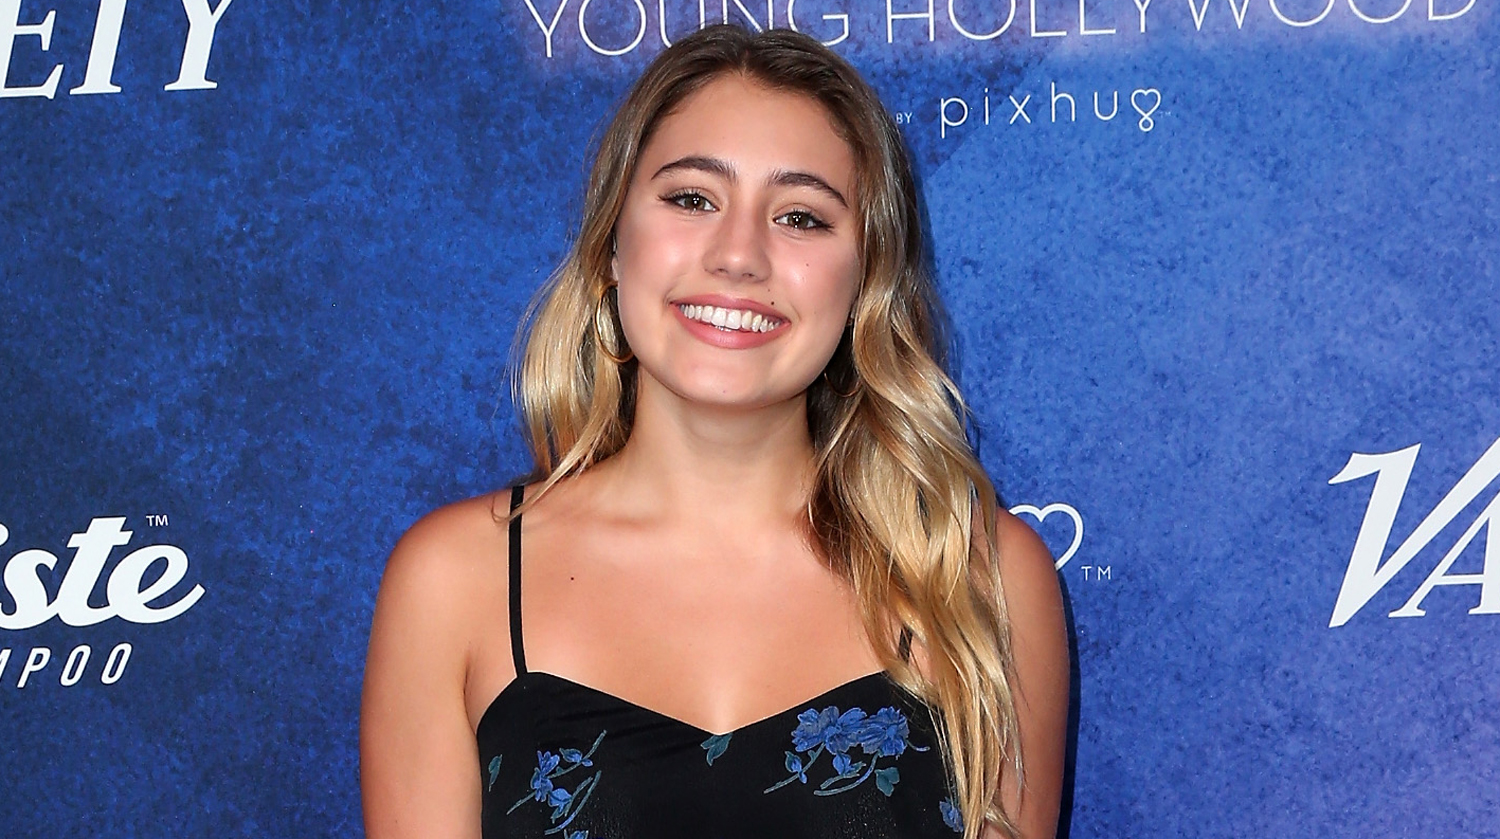 Lia Marie Johnsons Fans Are Concerned After A Disturbing Live Stream Lia Marie Johnson Just 6302